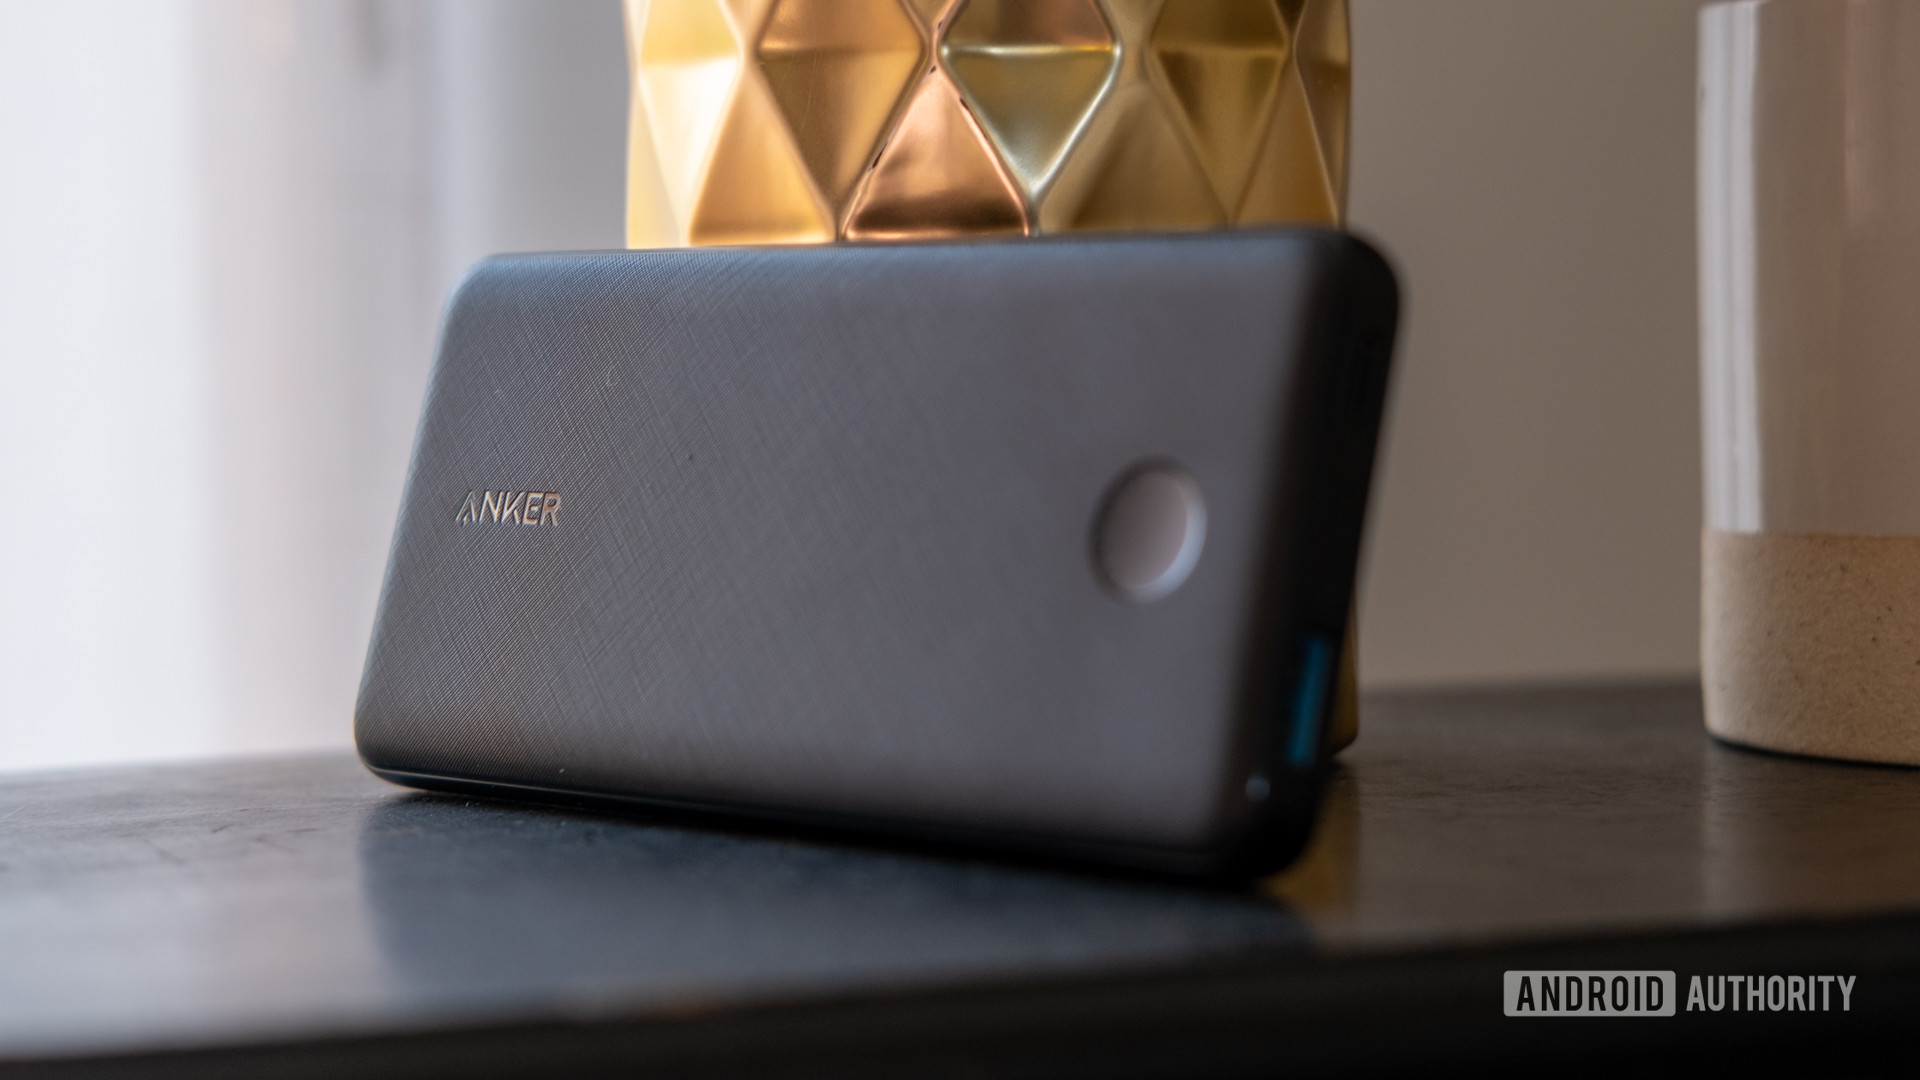 Anker Black Friday deals: Save up to 35% on charging accessories